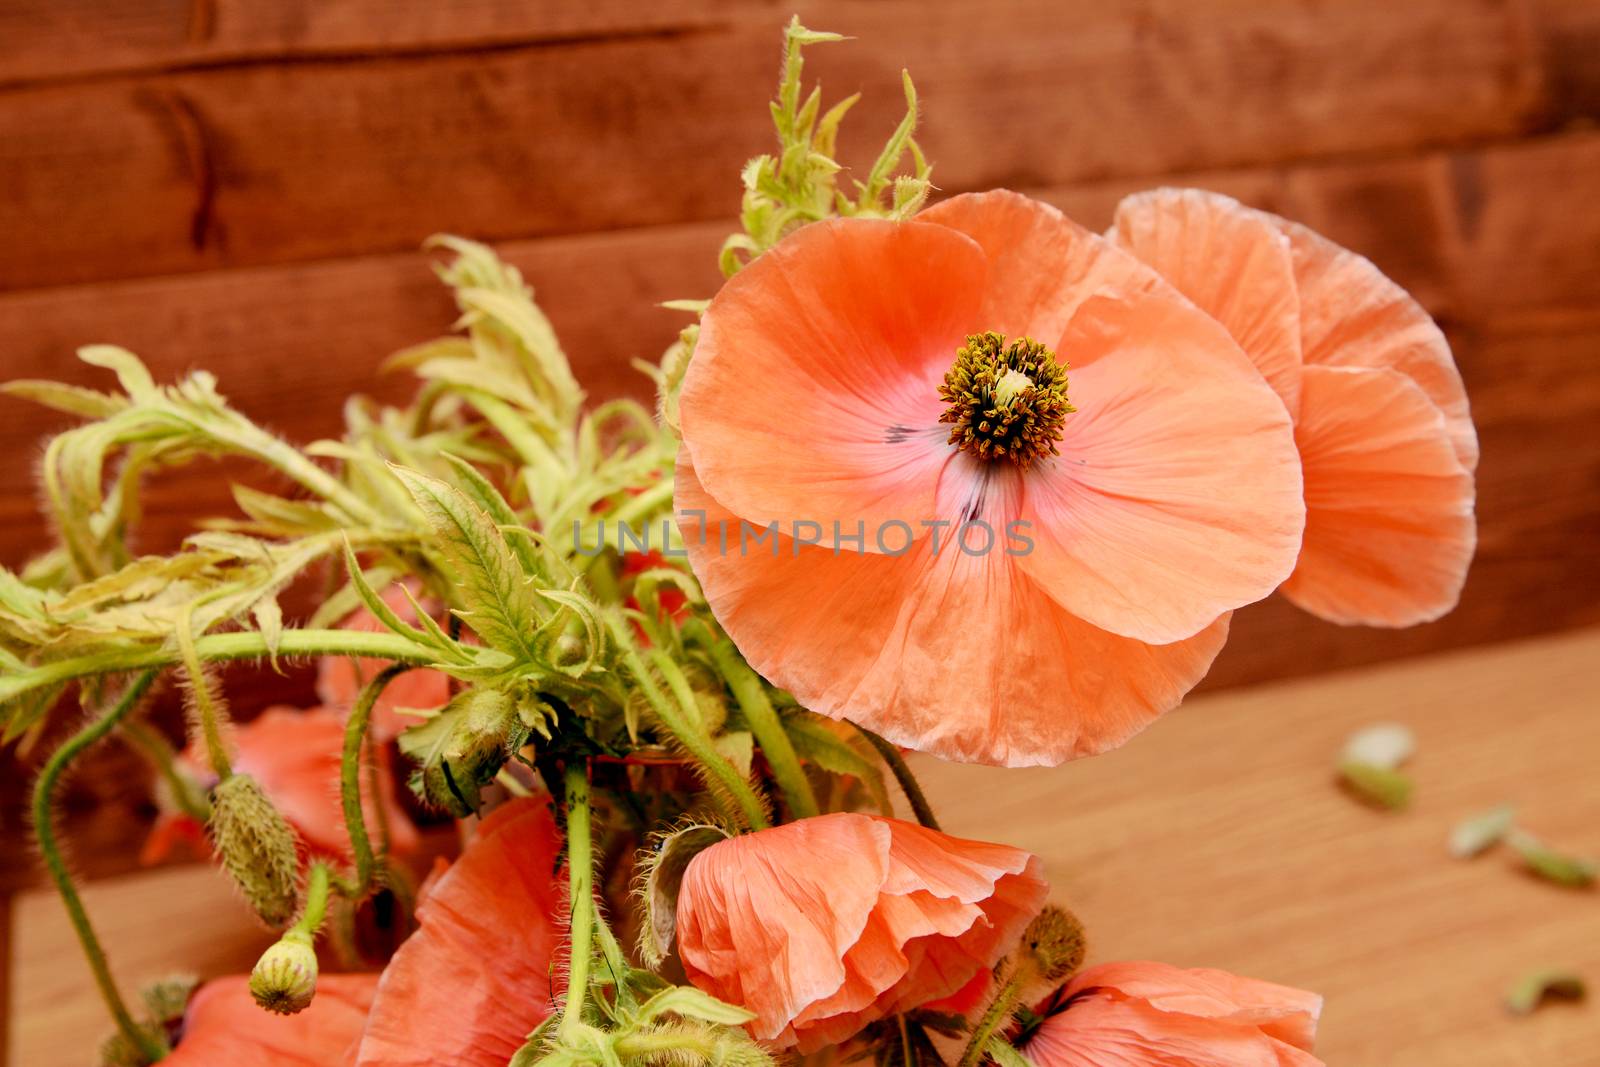 Pink poppy in selective focus among tangled foliage and flowers against a wooden background